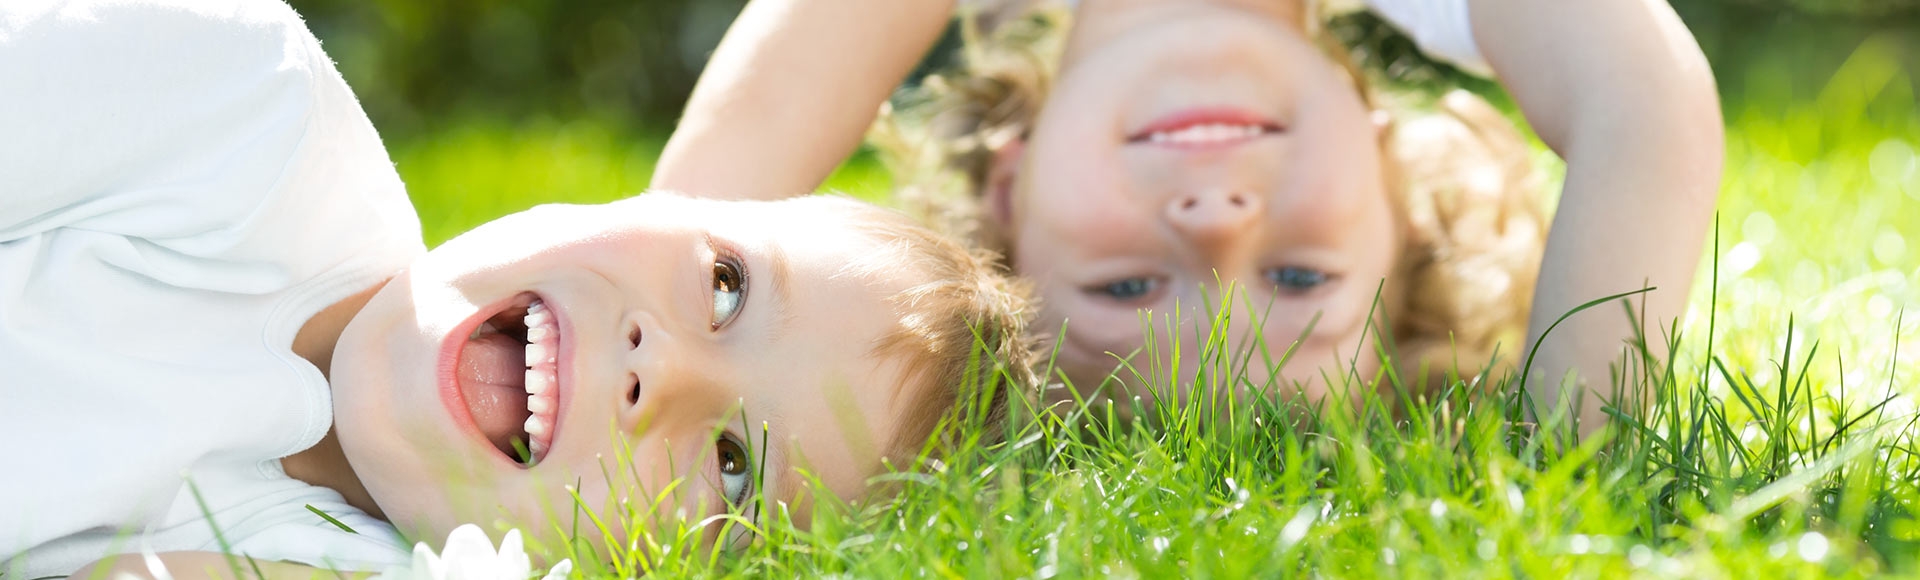 young children playing in grass